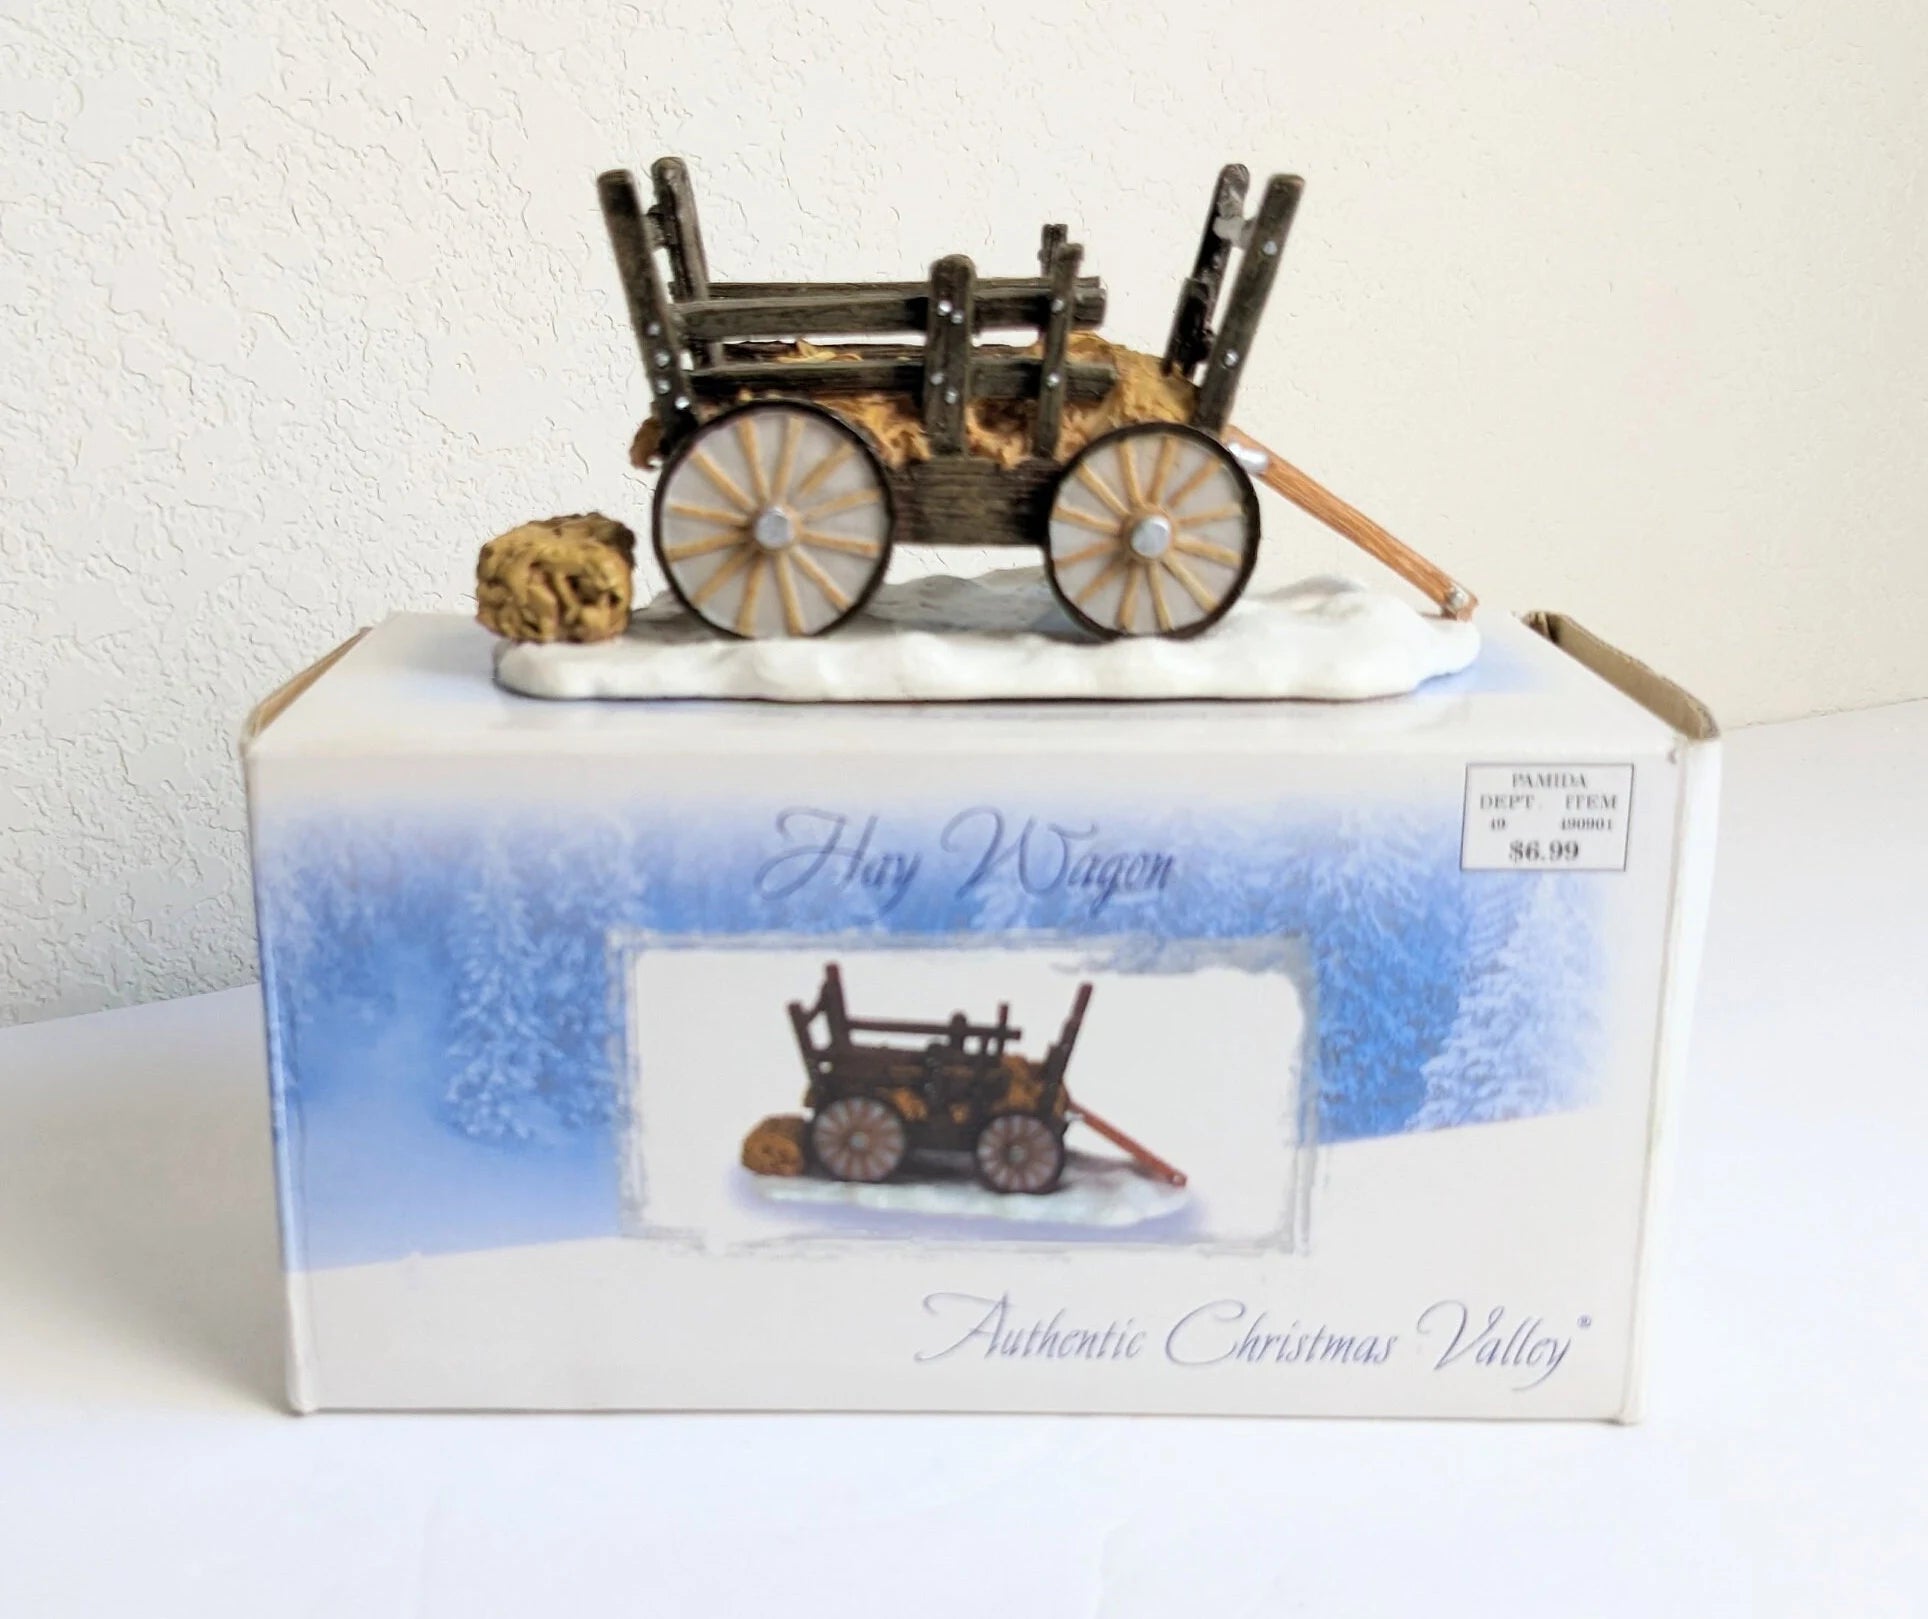 Hay Wagon Authentic Christmas Village Accessory